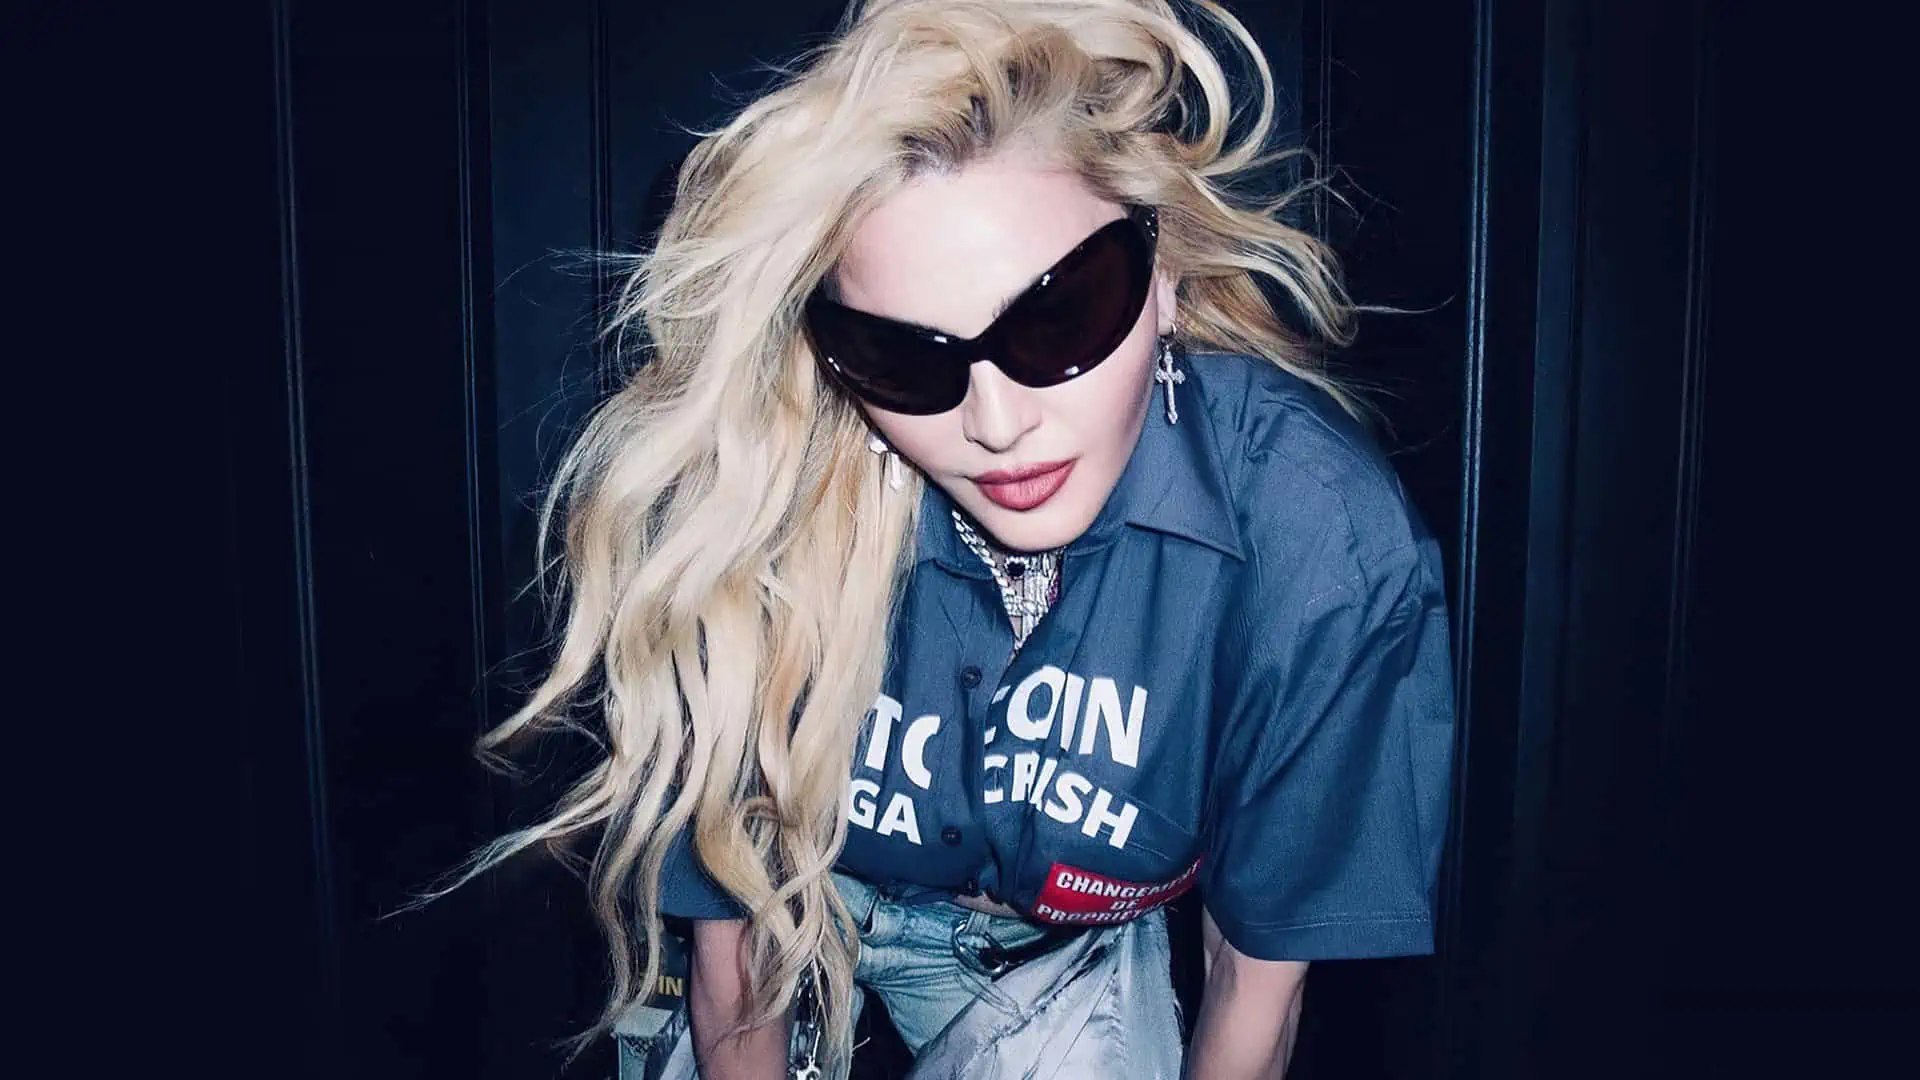 Madonna leans towards the camera with her hair down and wearing oversized sunglasses